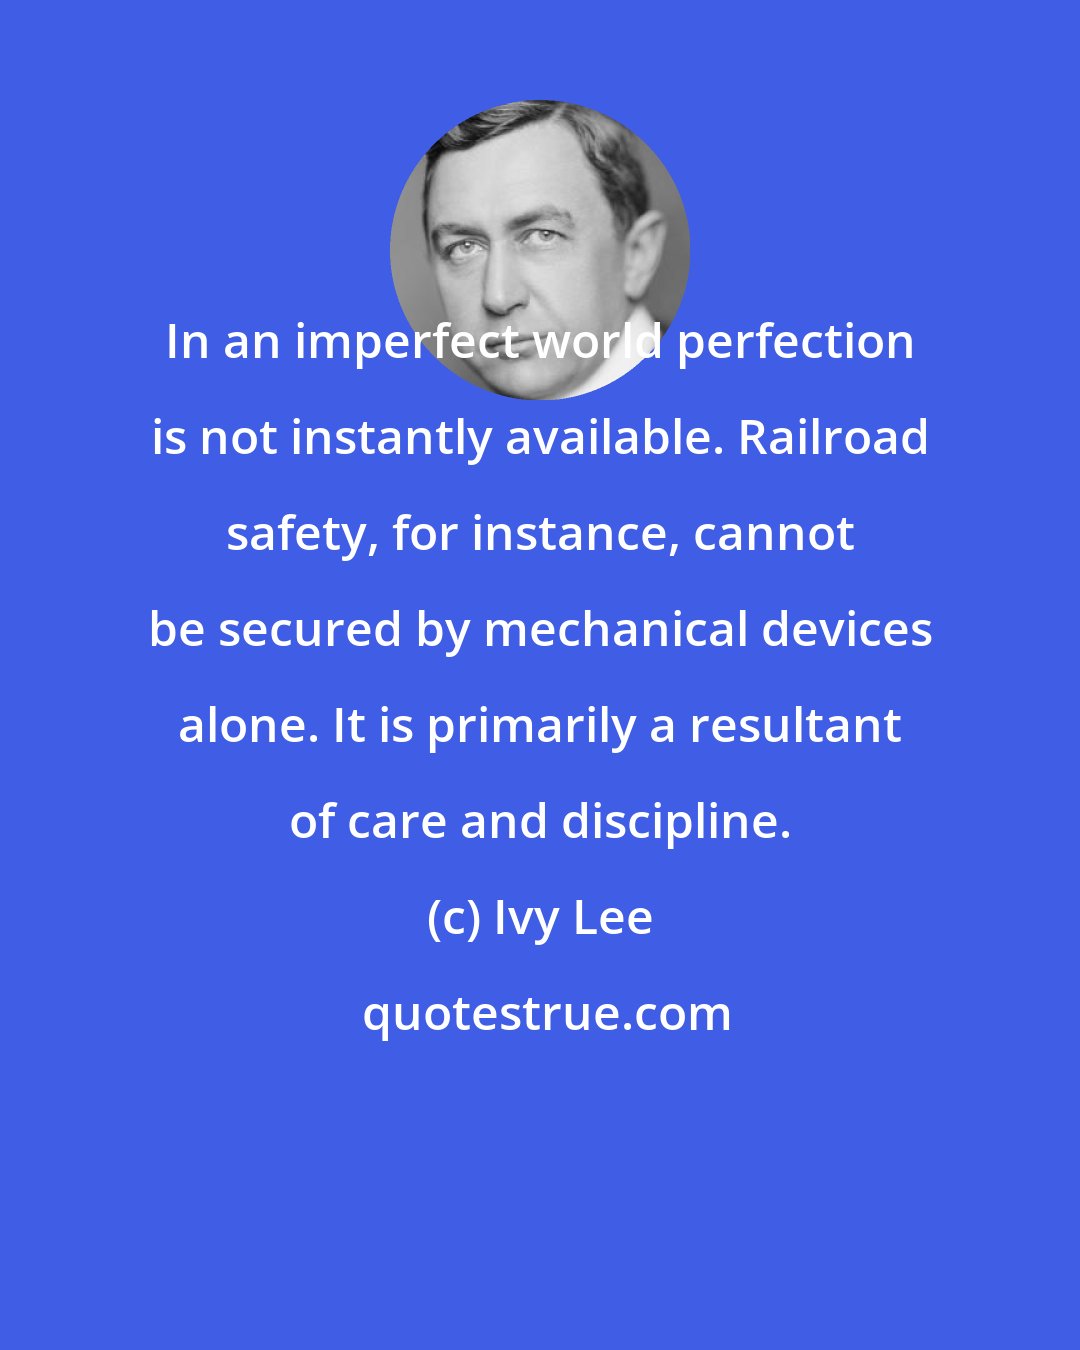 Ivy Lee: In an imperfect world perfection is not instantly available. Railroad safety, for instance, cannot be secured by mechanical devices alone. It is primarily a resultant of care and discipline.